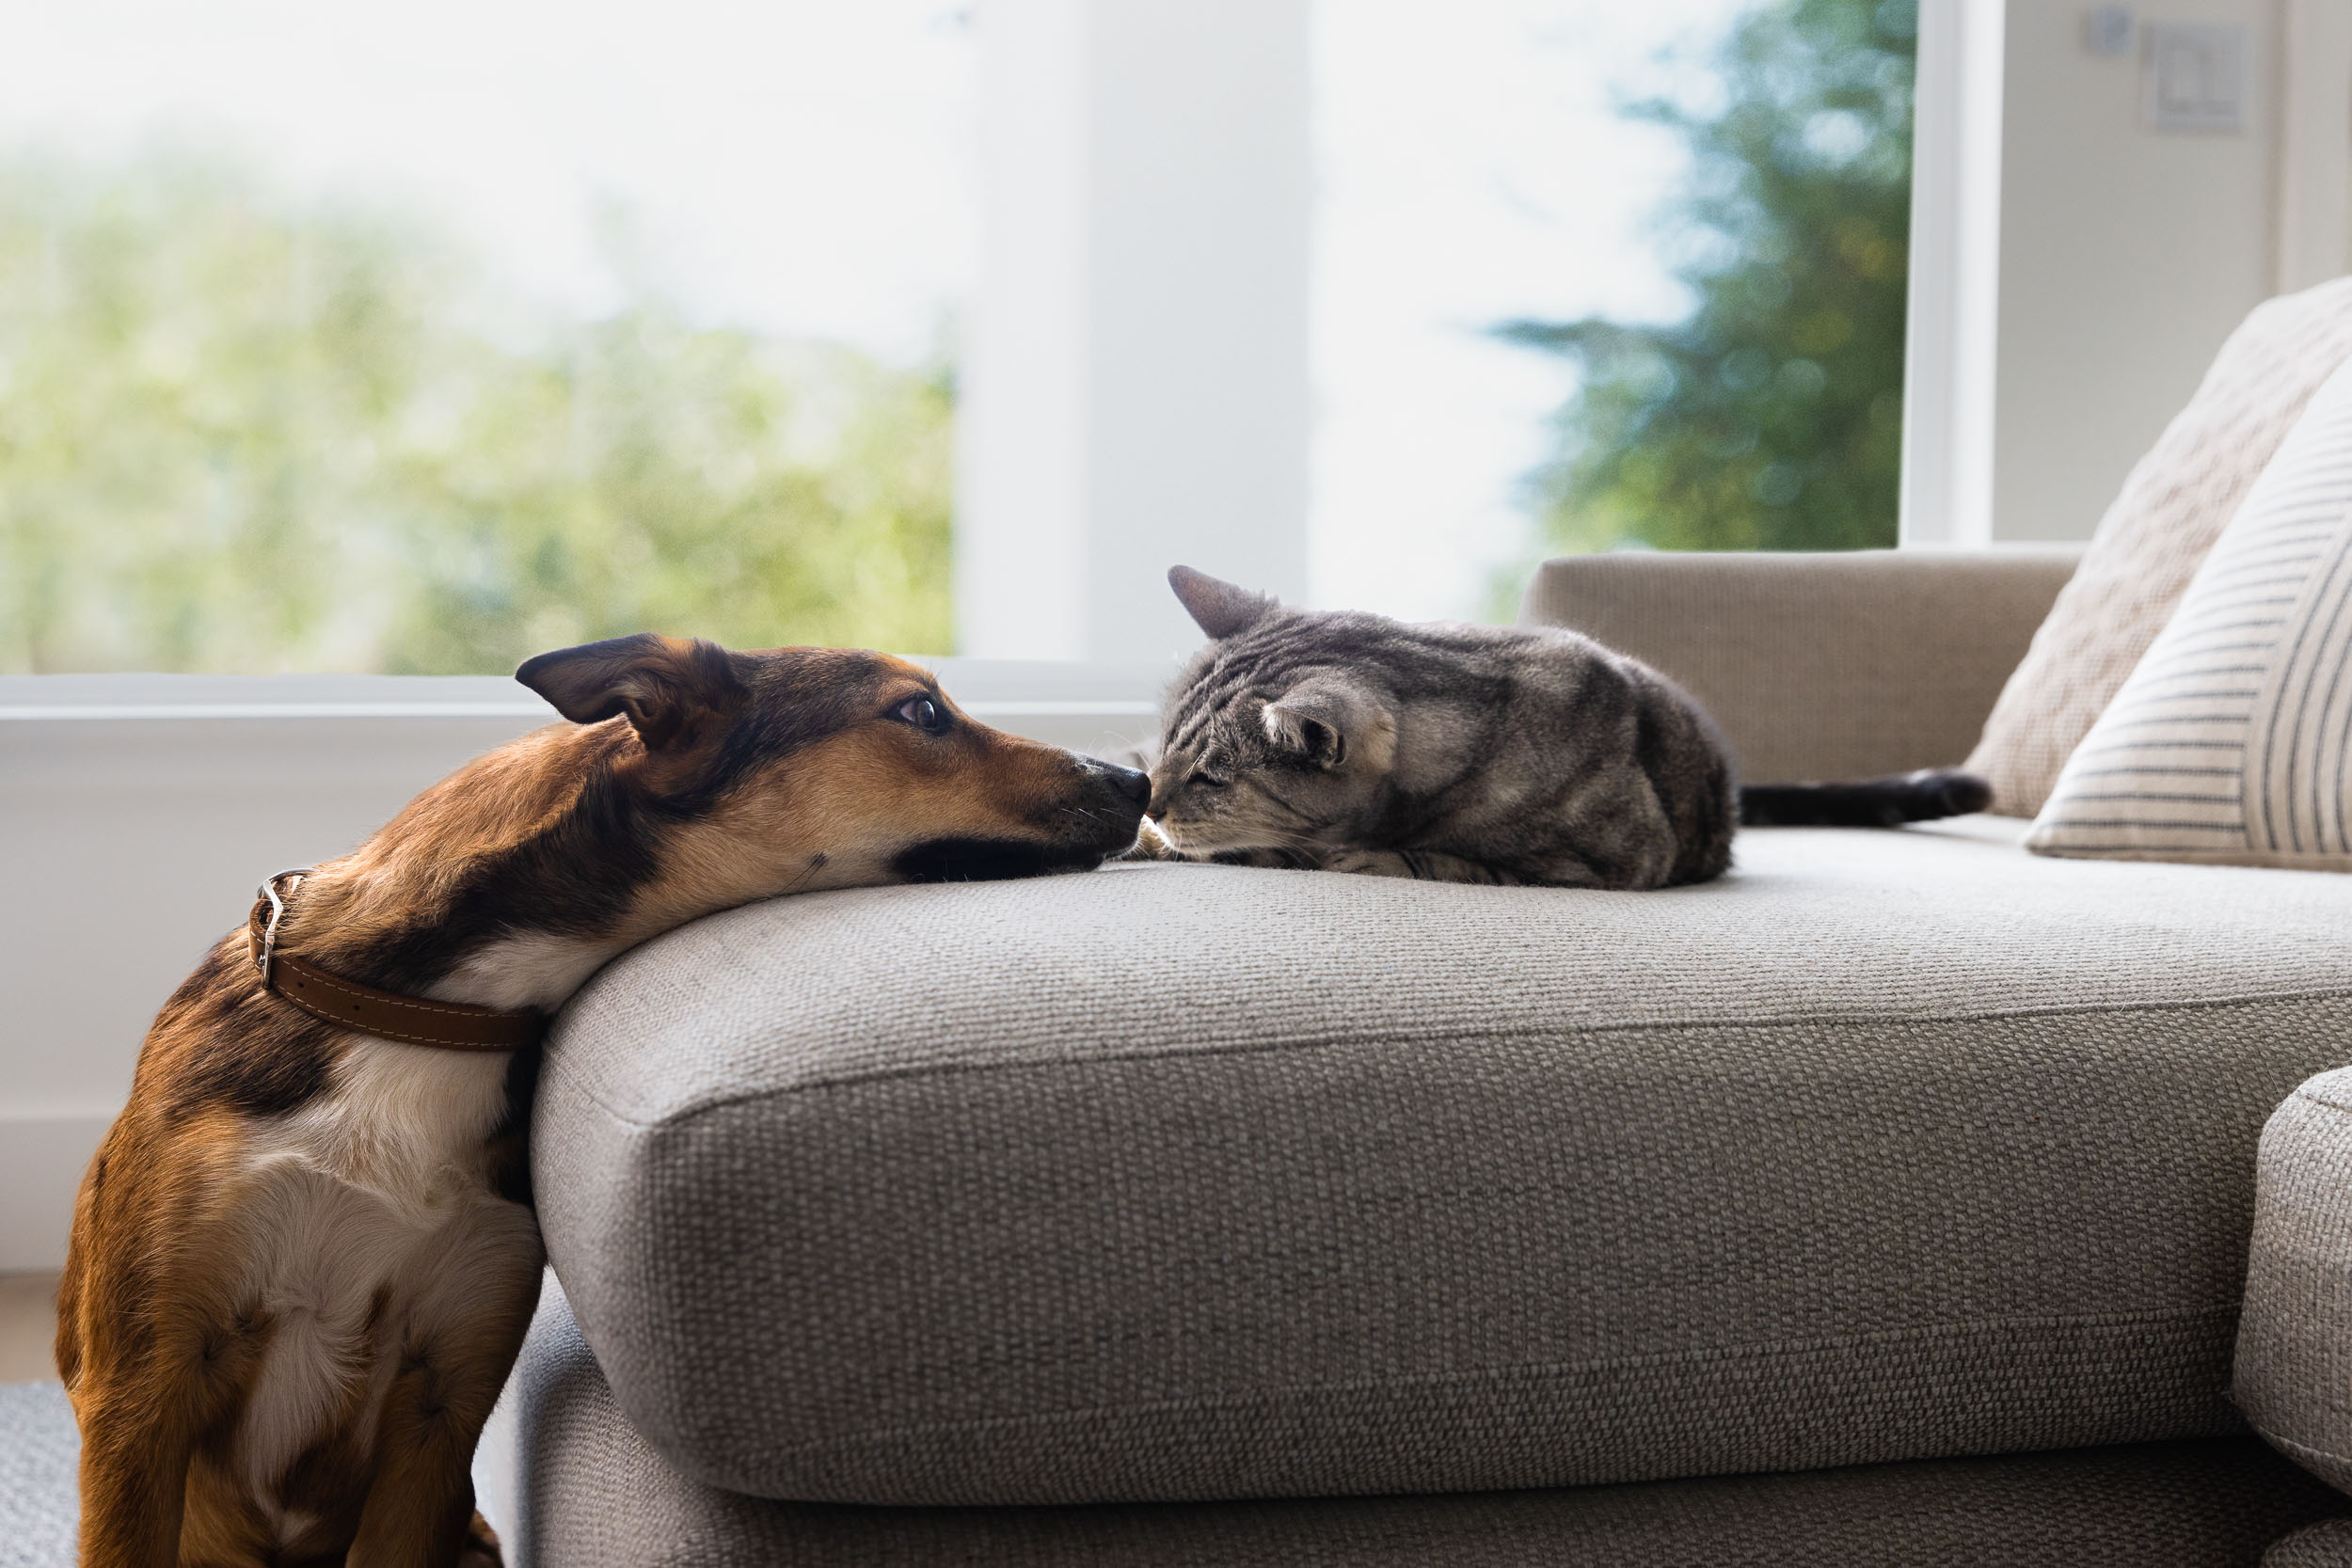 Pet Advertising Photo | Dog and Cat Touching Noses by Mark Rogers